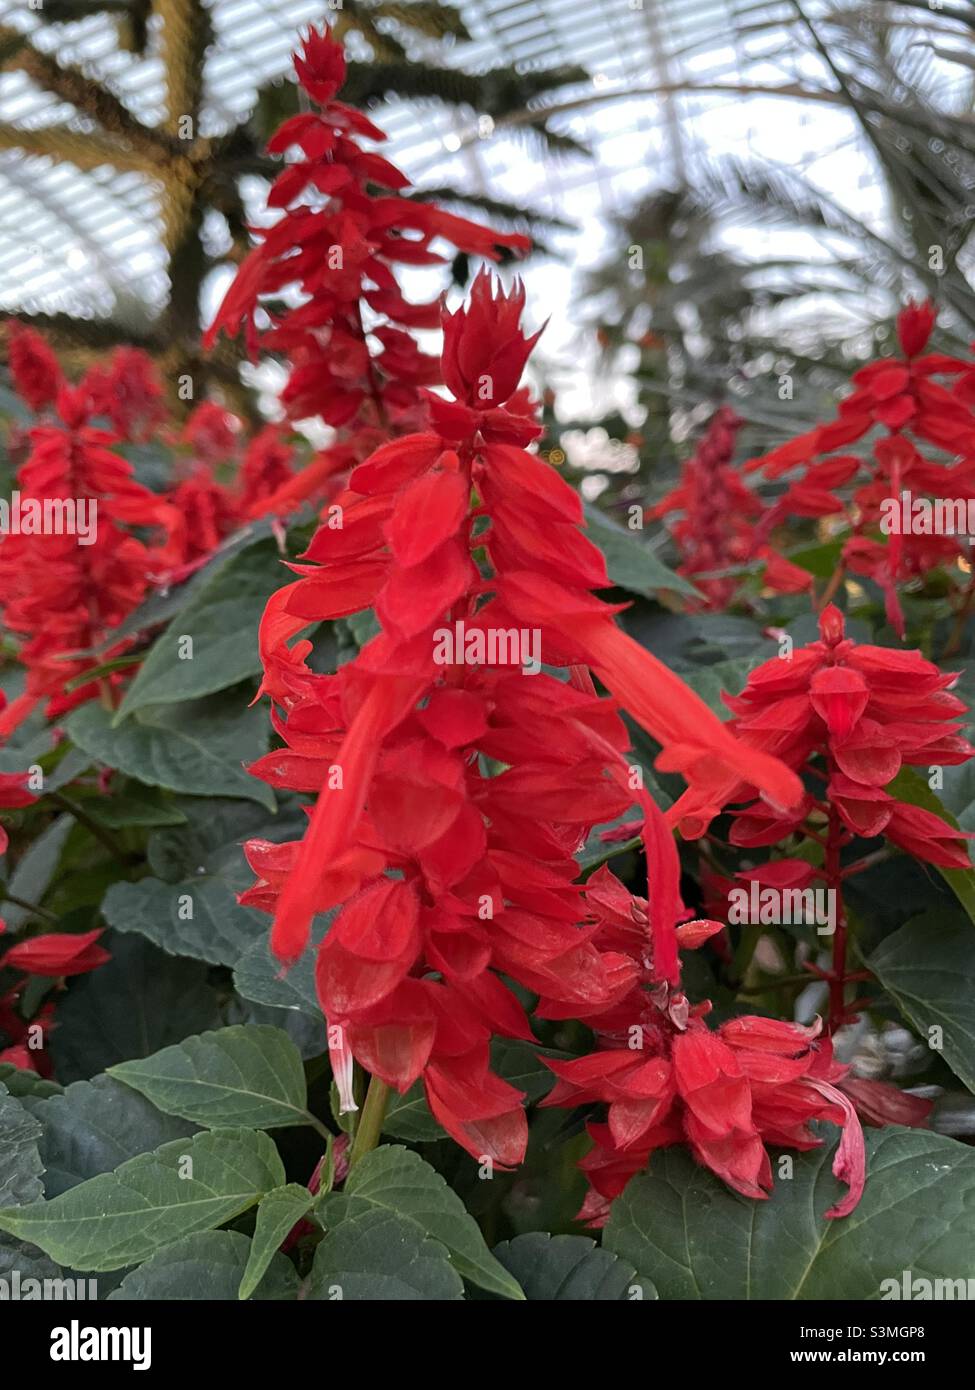 Red blooms, feels likes Christmas garden Stock Photo